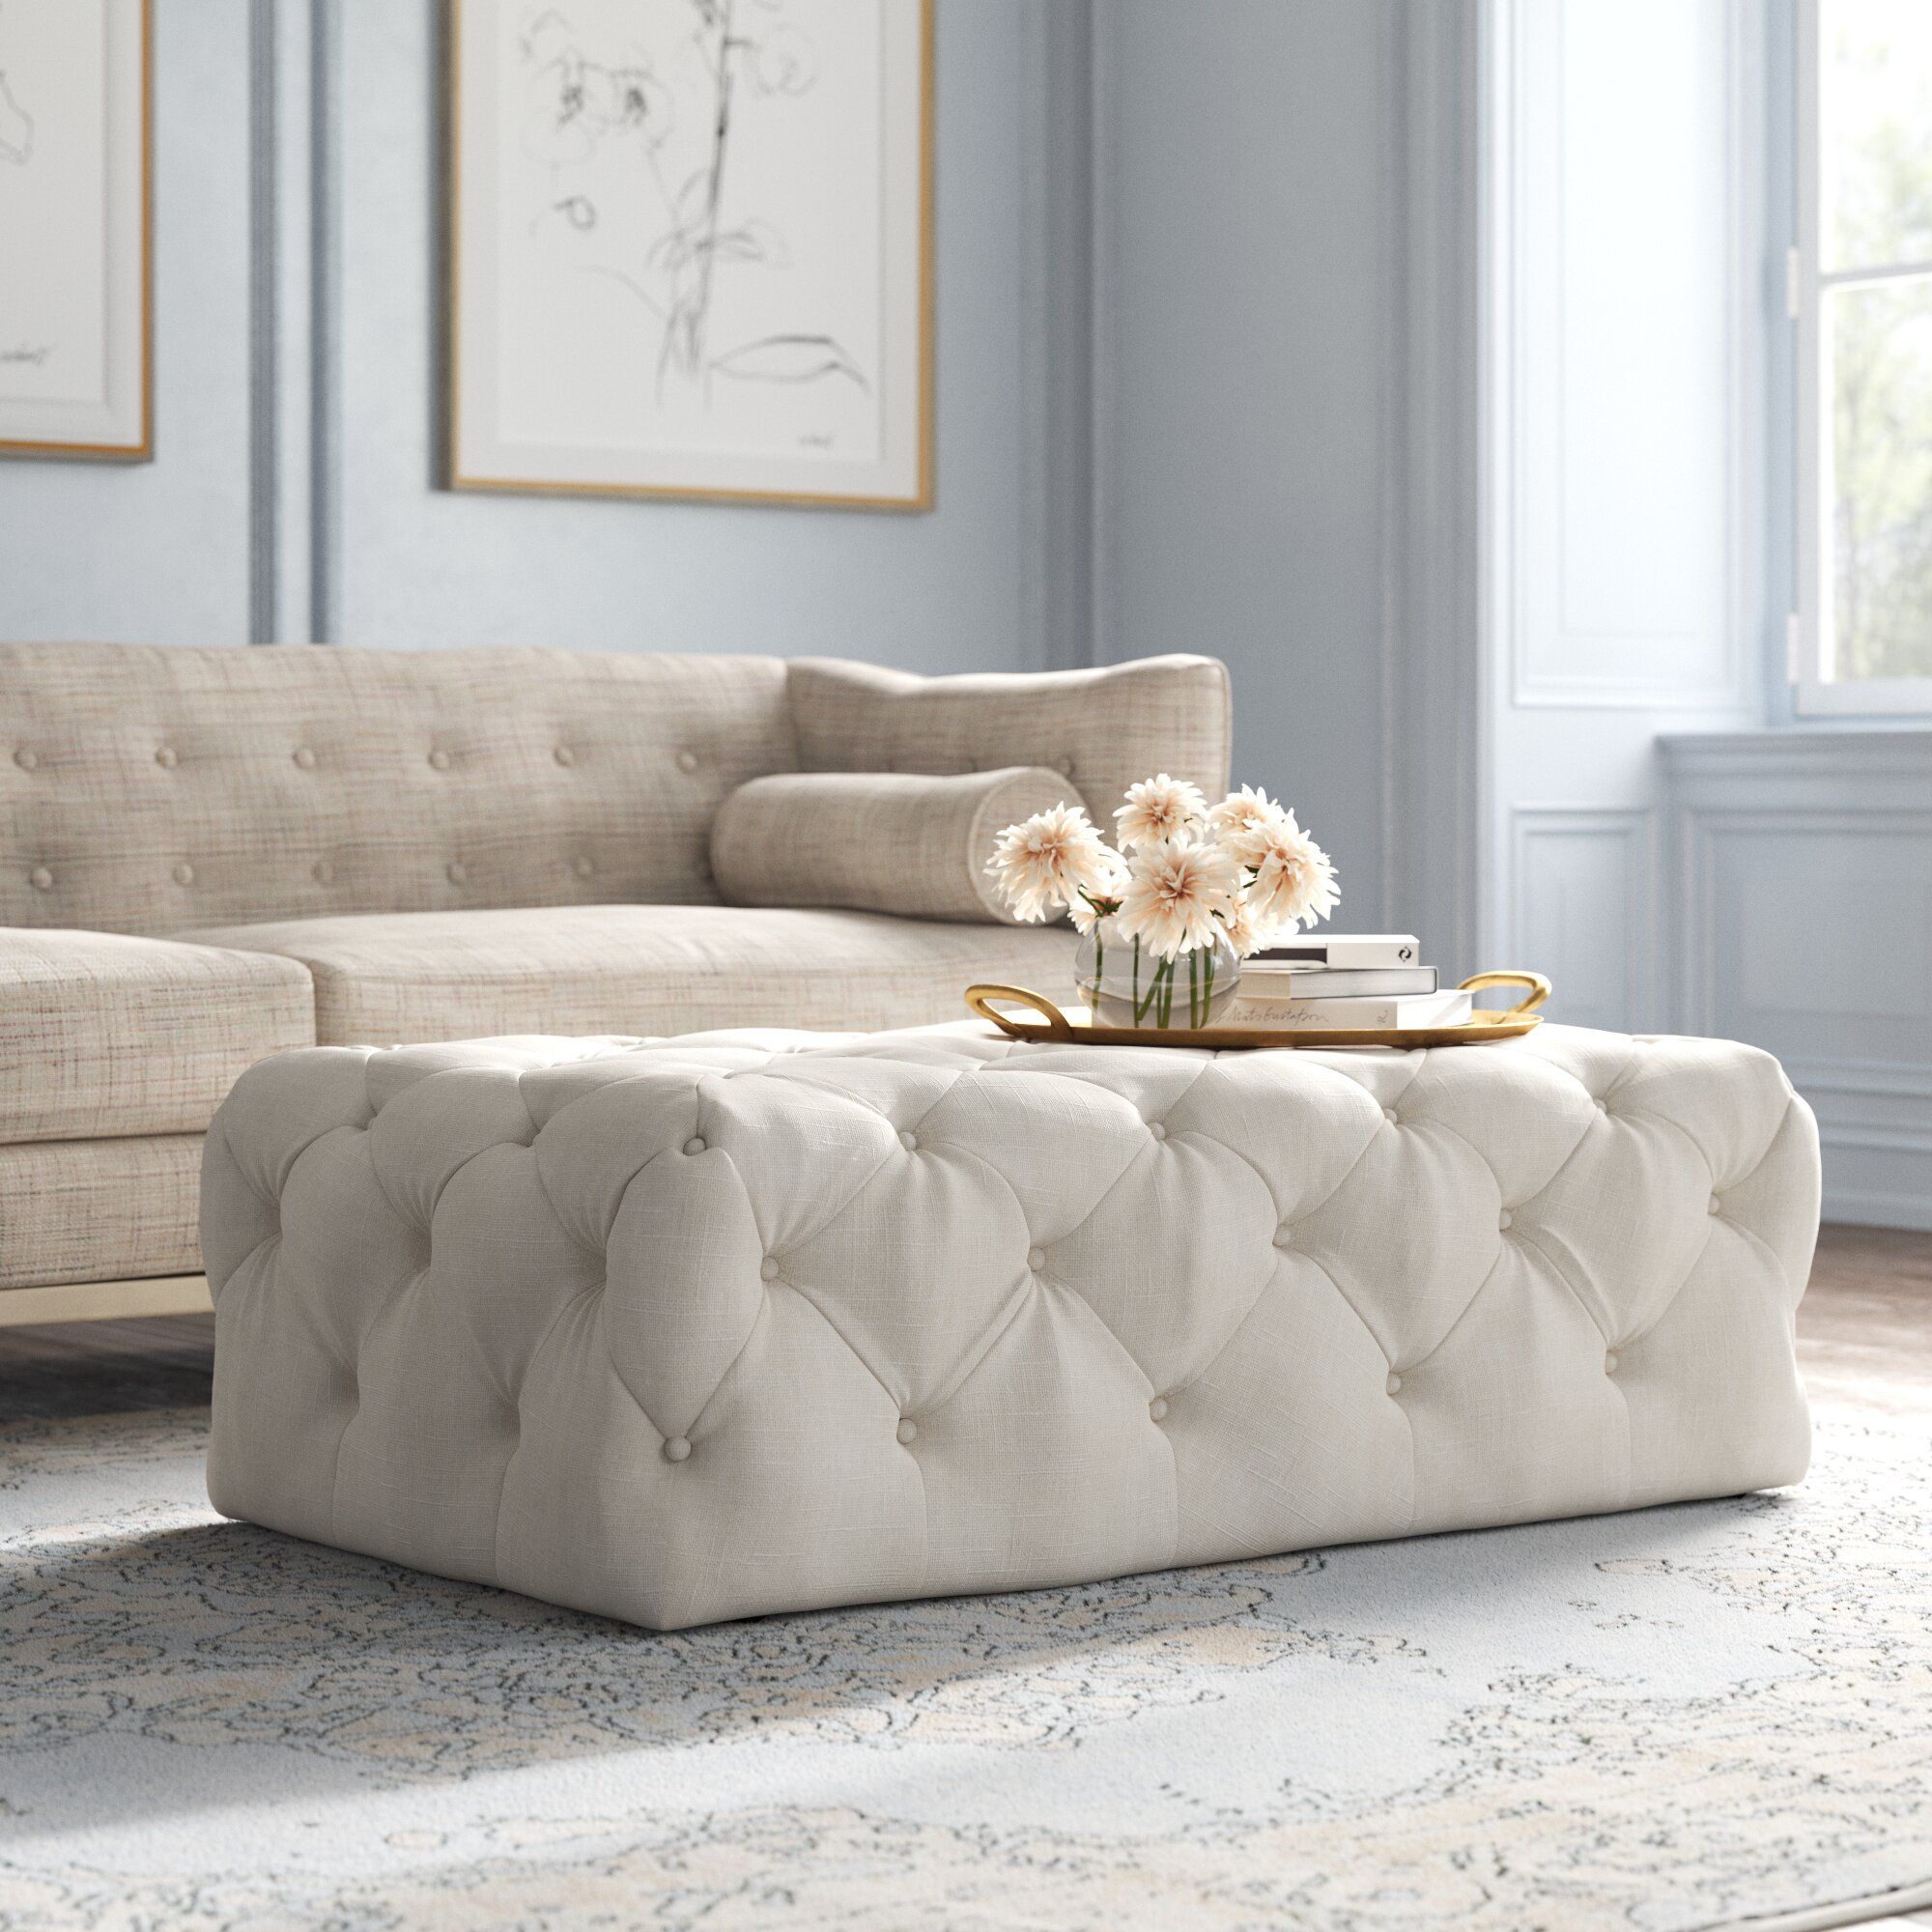 Kelly Clarkson Home Acklen Upholstered Ottoman & Reviews | Wayfair Inside Upholstered Ottomans (View 8 of 15)